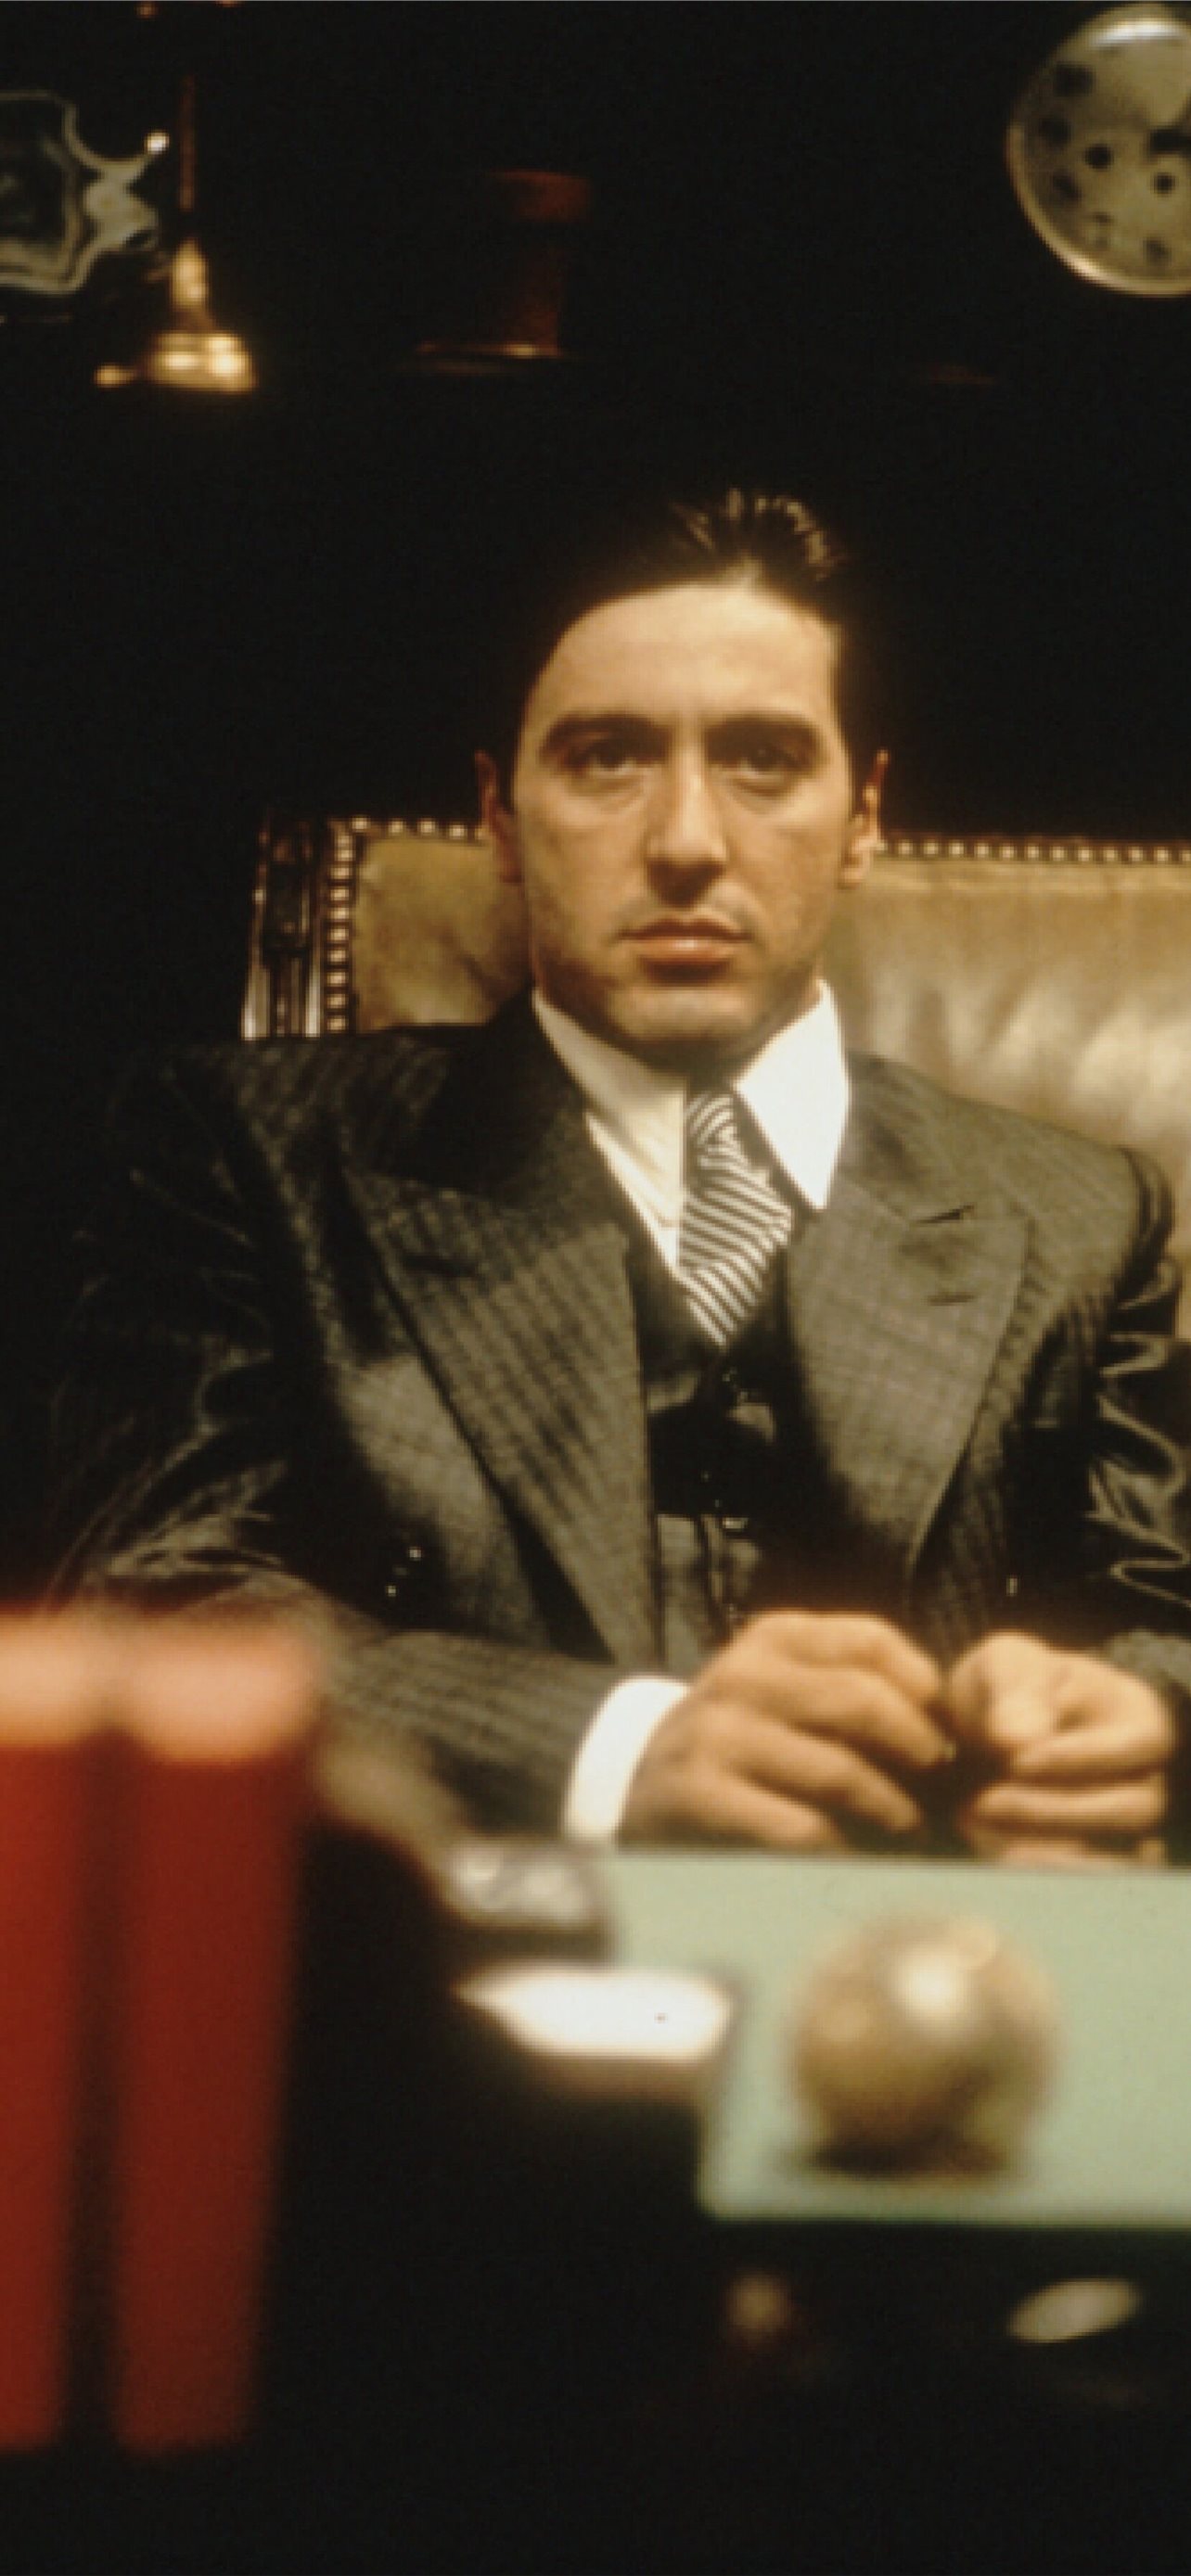 Best The godfather part ii iPhone HD